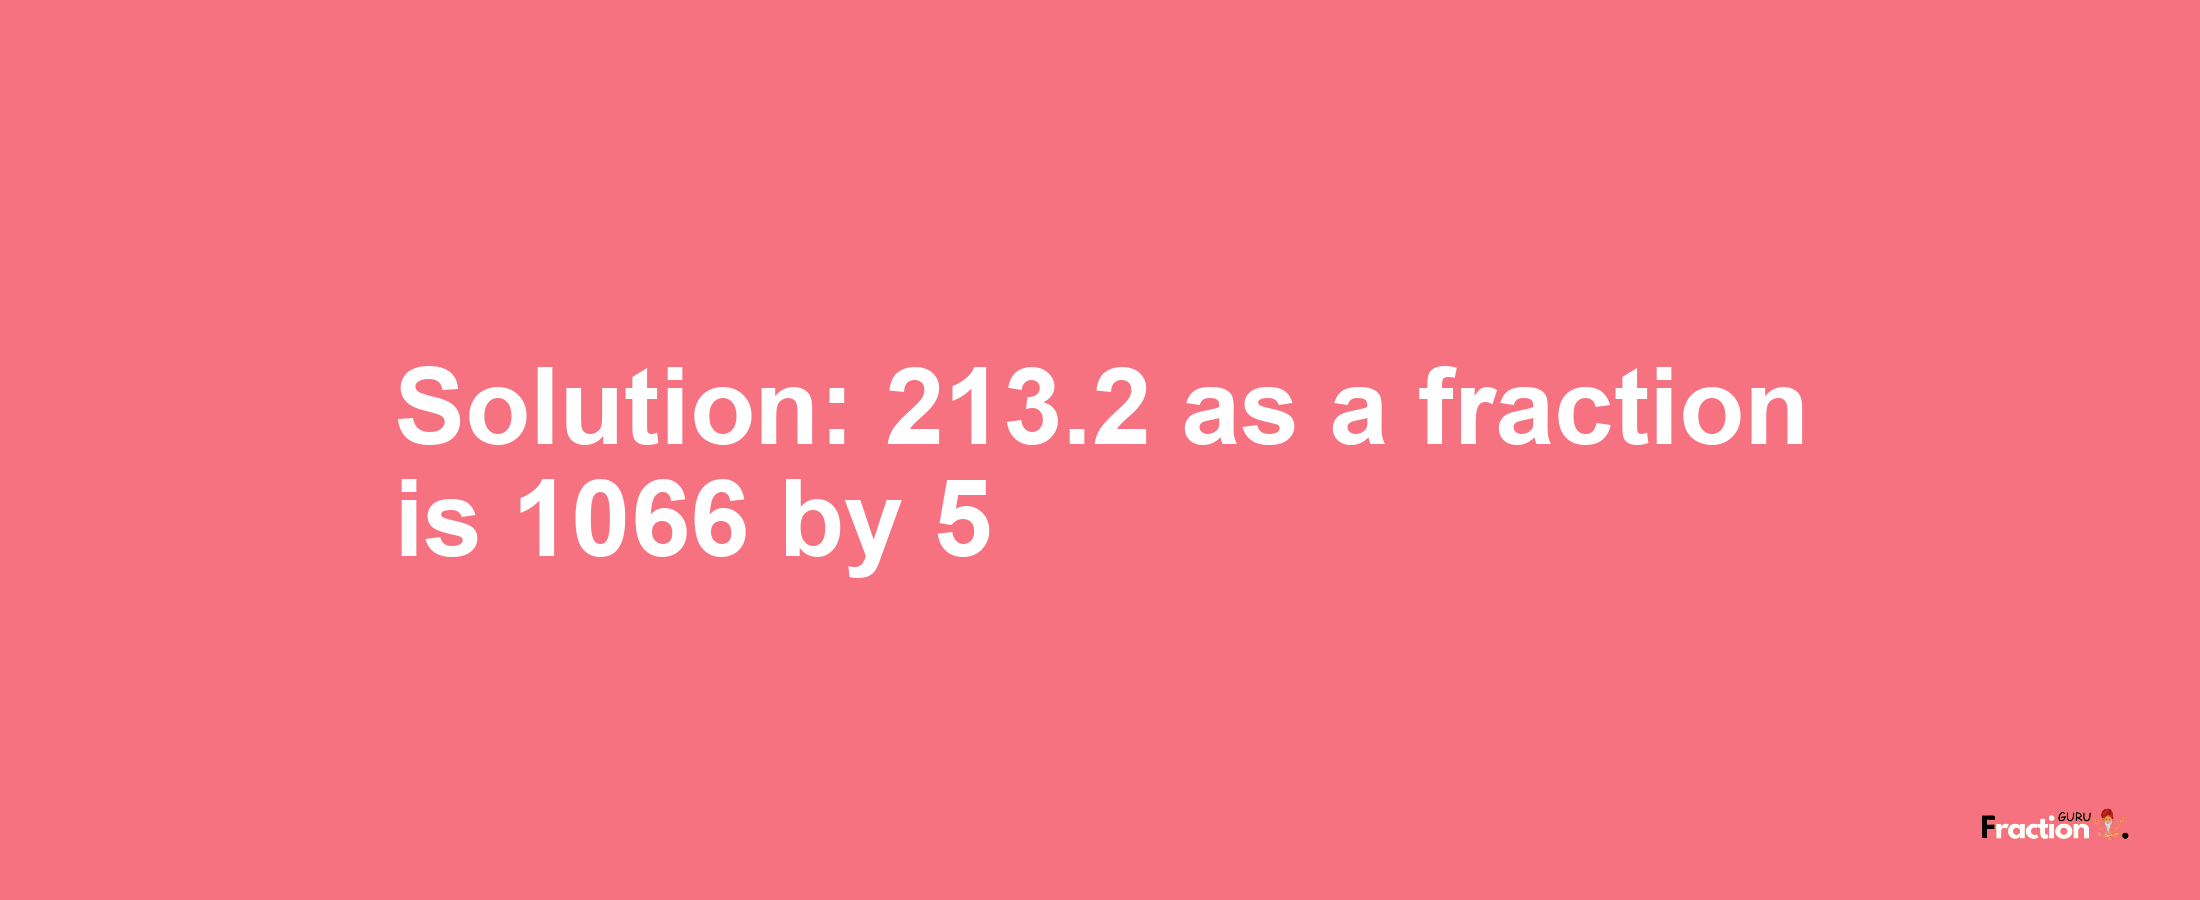 Solution:213.2 as a fraction is 1066/5